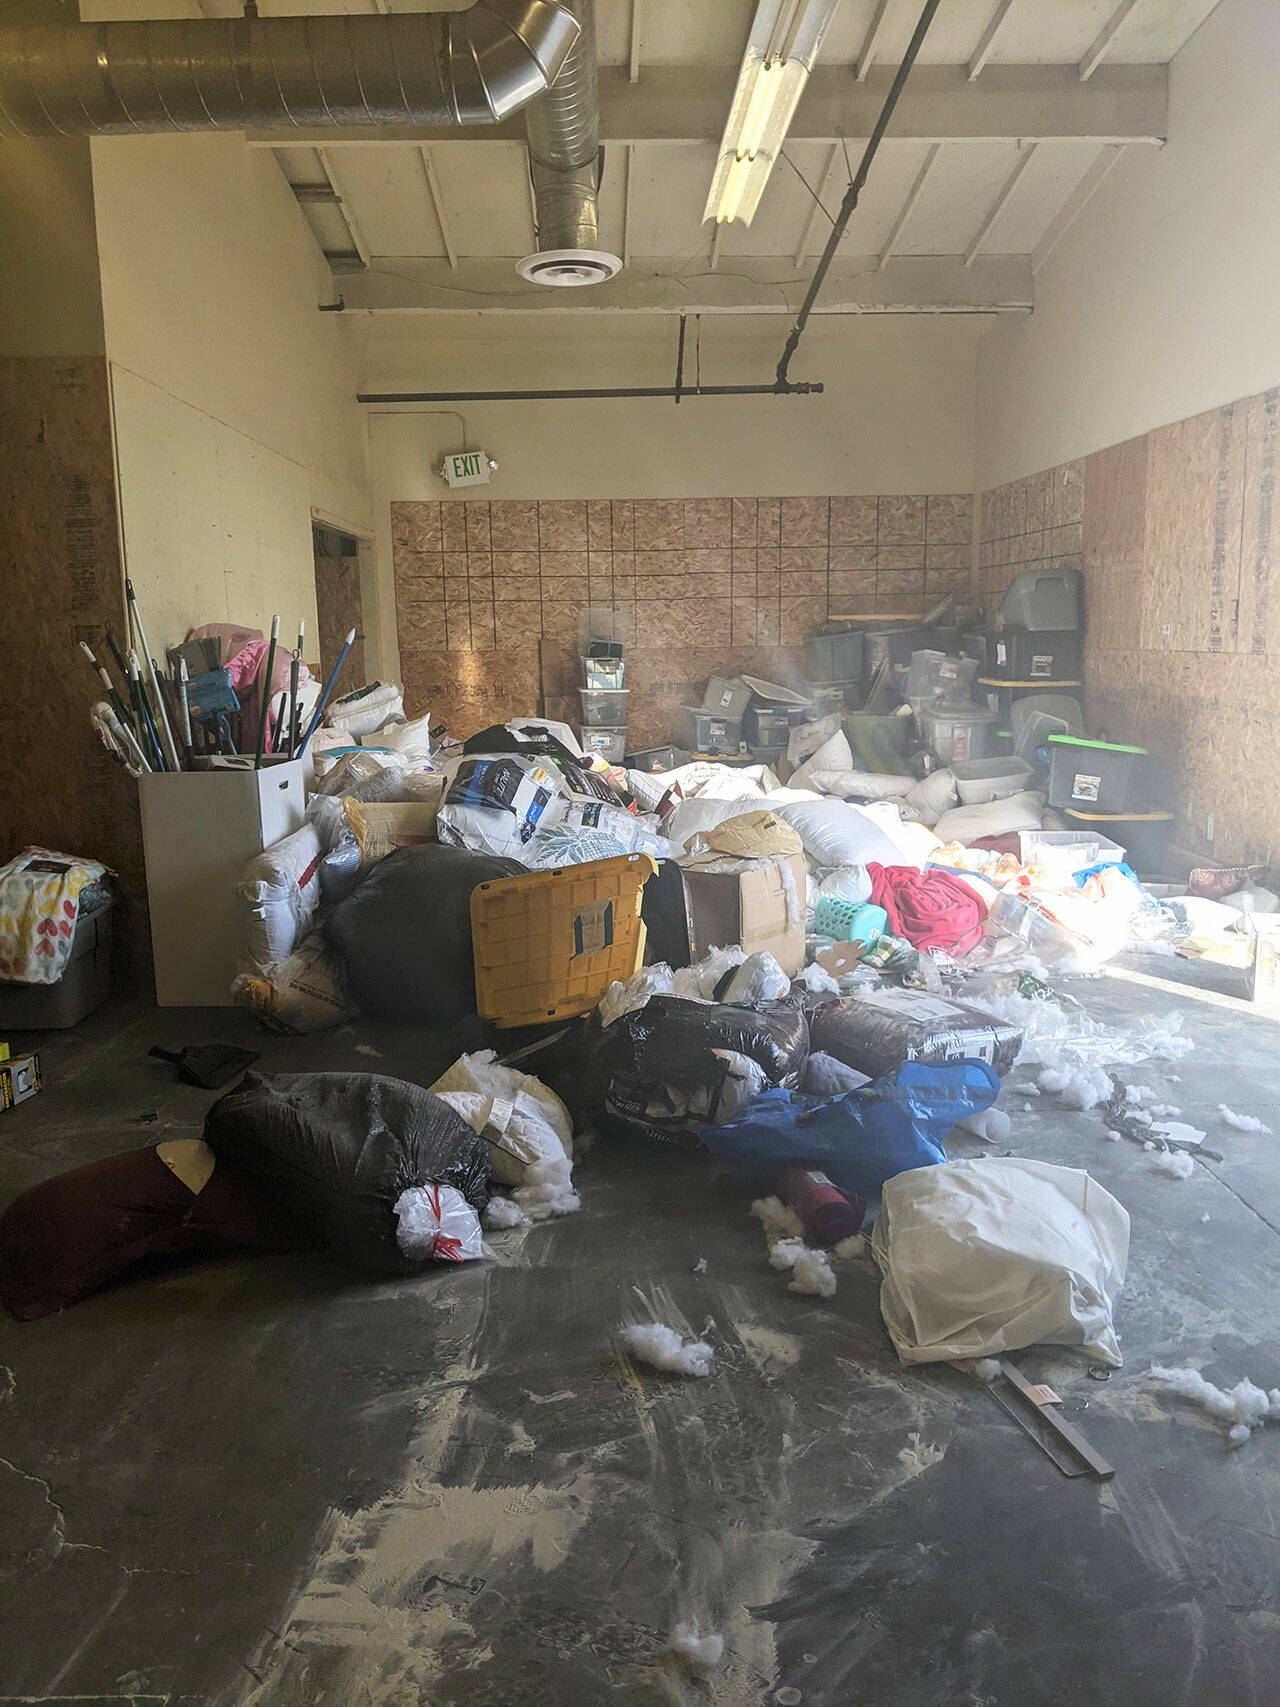 Vandals damaged donated items for Afghan refugees Oct. 2 at a World Relief Seattle storage facility in Kent. COURTESY PHOTO, The Mission Continues